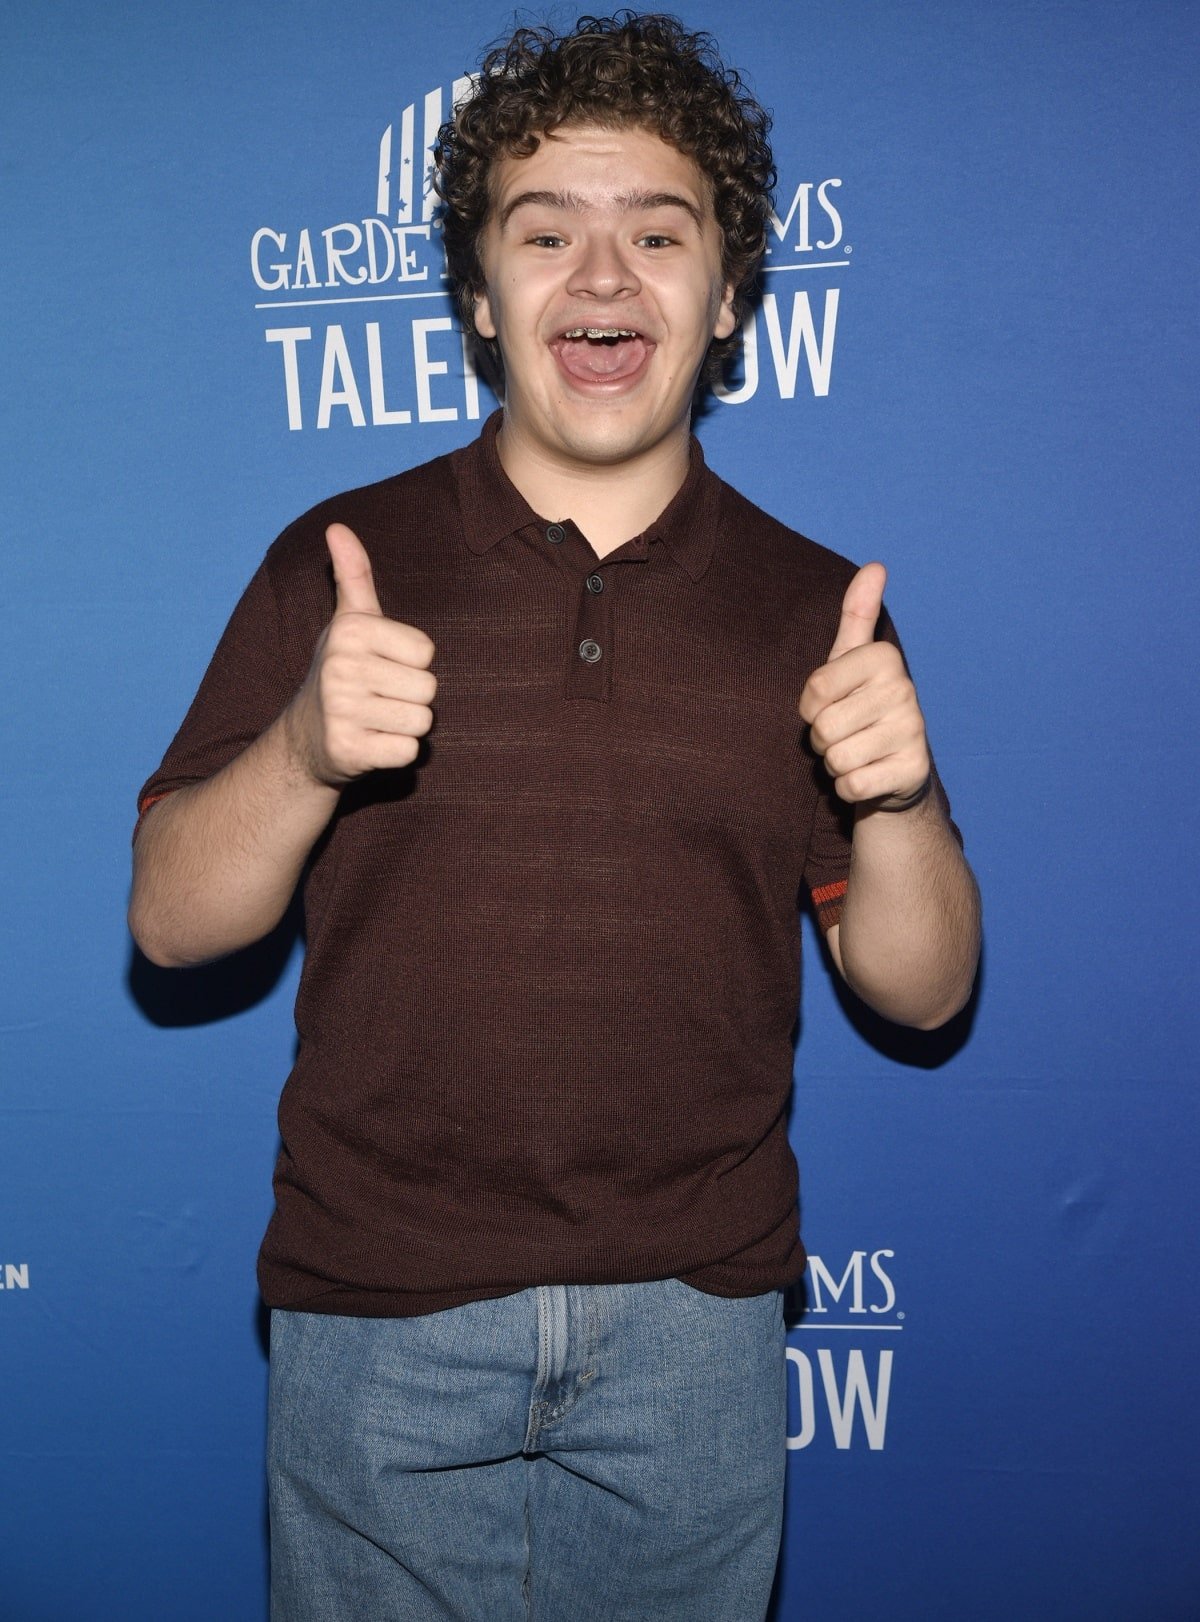 Gaten Matarazzo at the 2022 Garden of Dreams Talent Show hosted by The Garden of Dreams Foundation, a non-profit organization that works with MSG Entertainment and MSG Sports to bring life-changing opportunities to young people in need